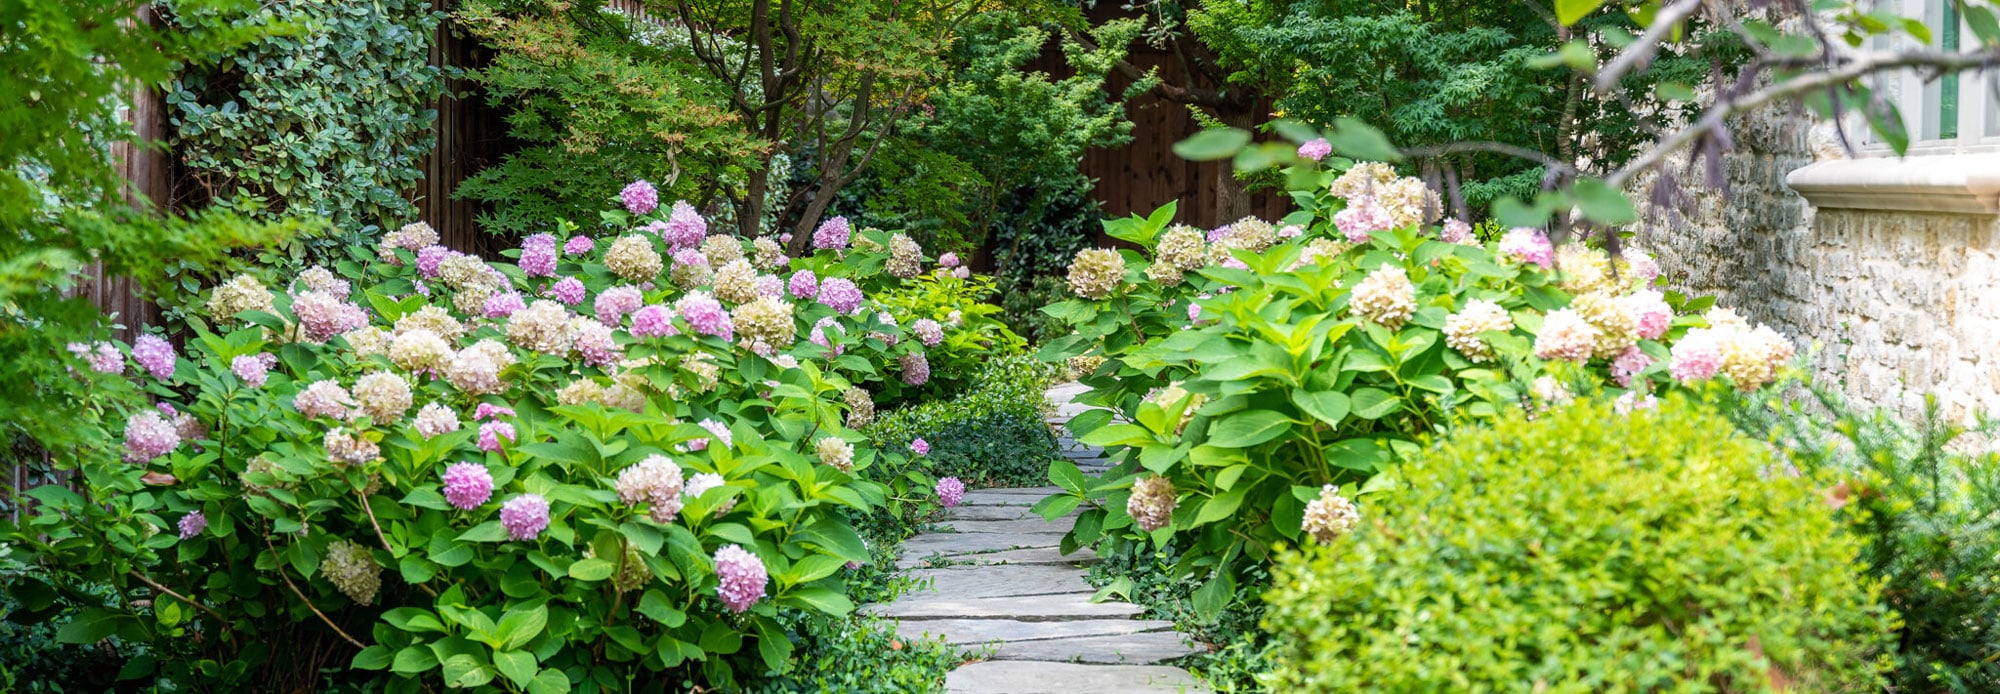 a stone path surrounded by lush green plants | Southern Botanical